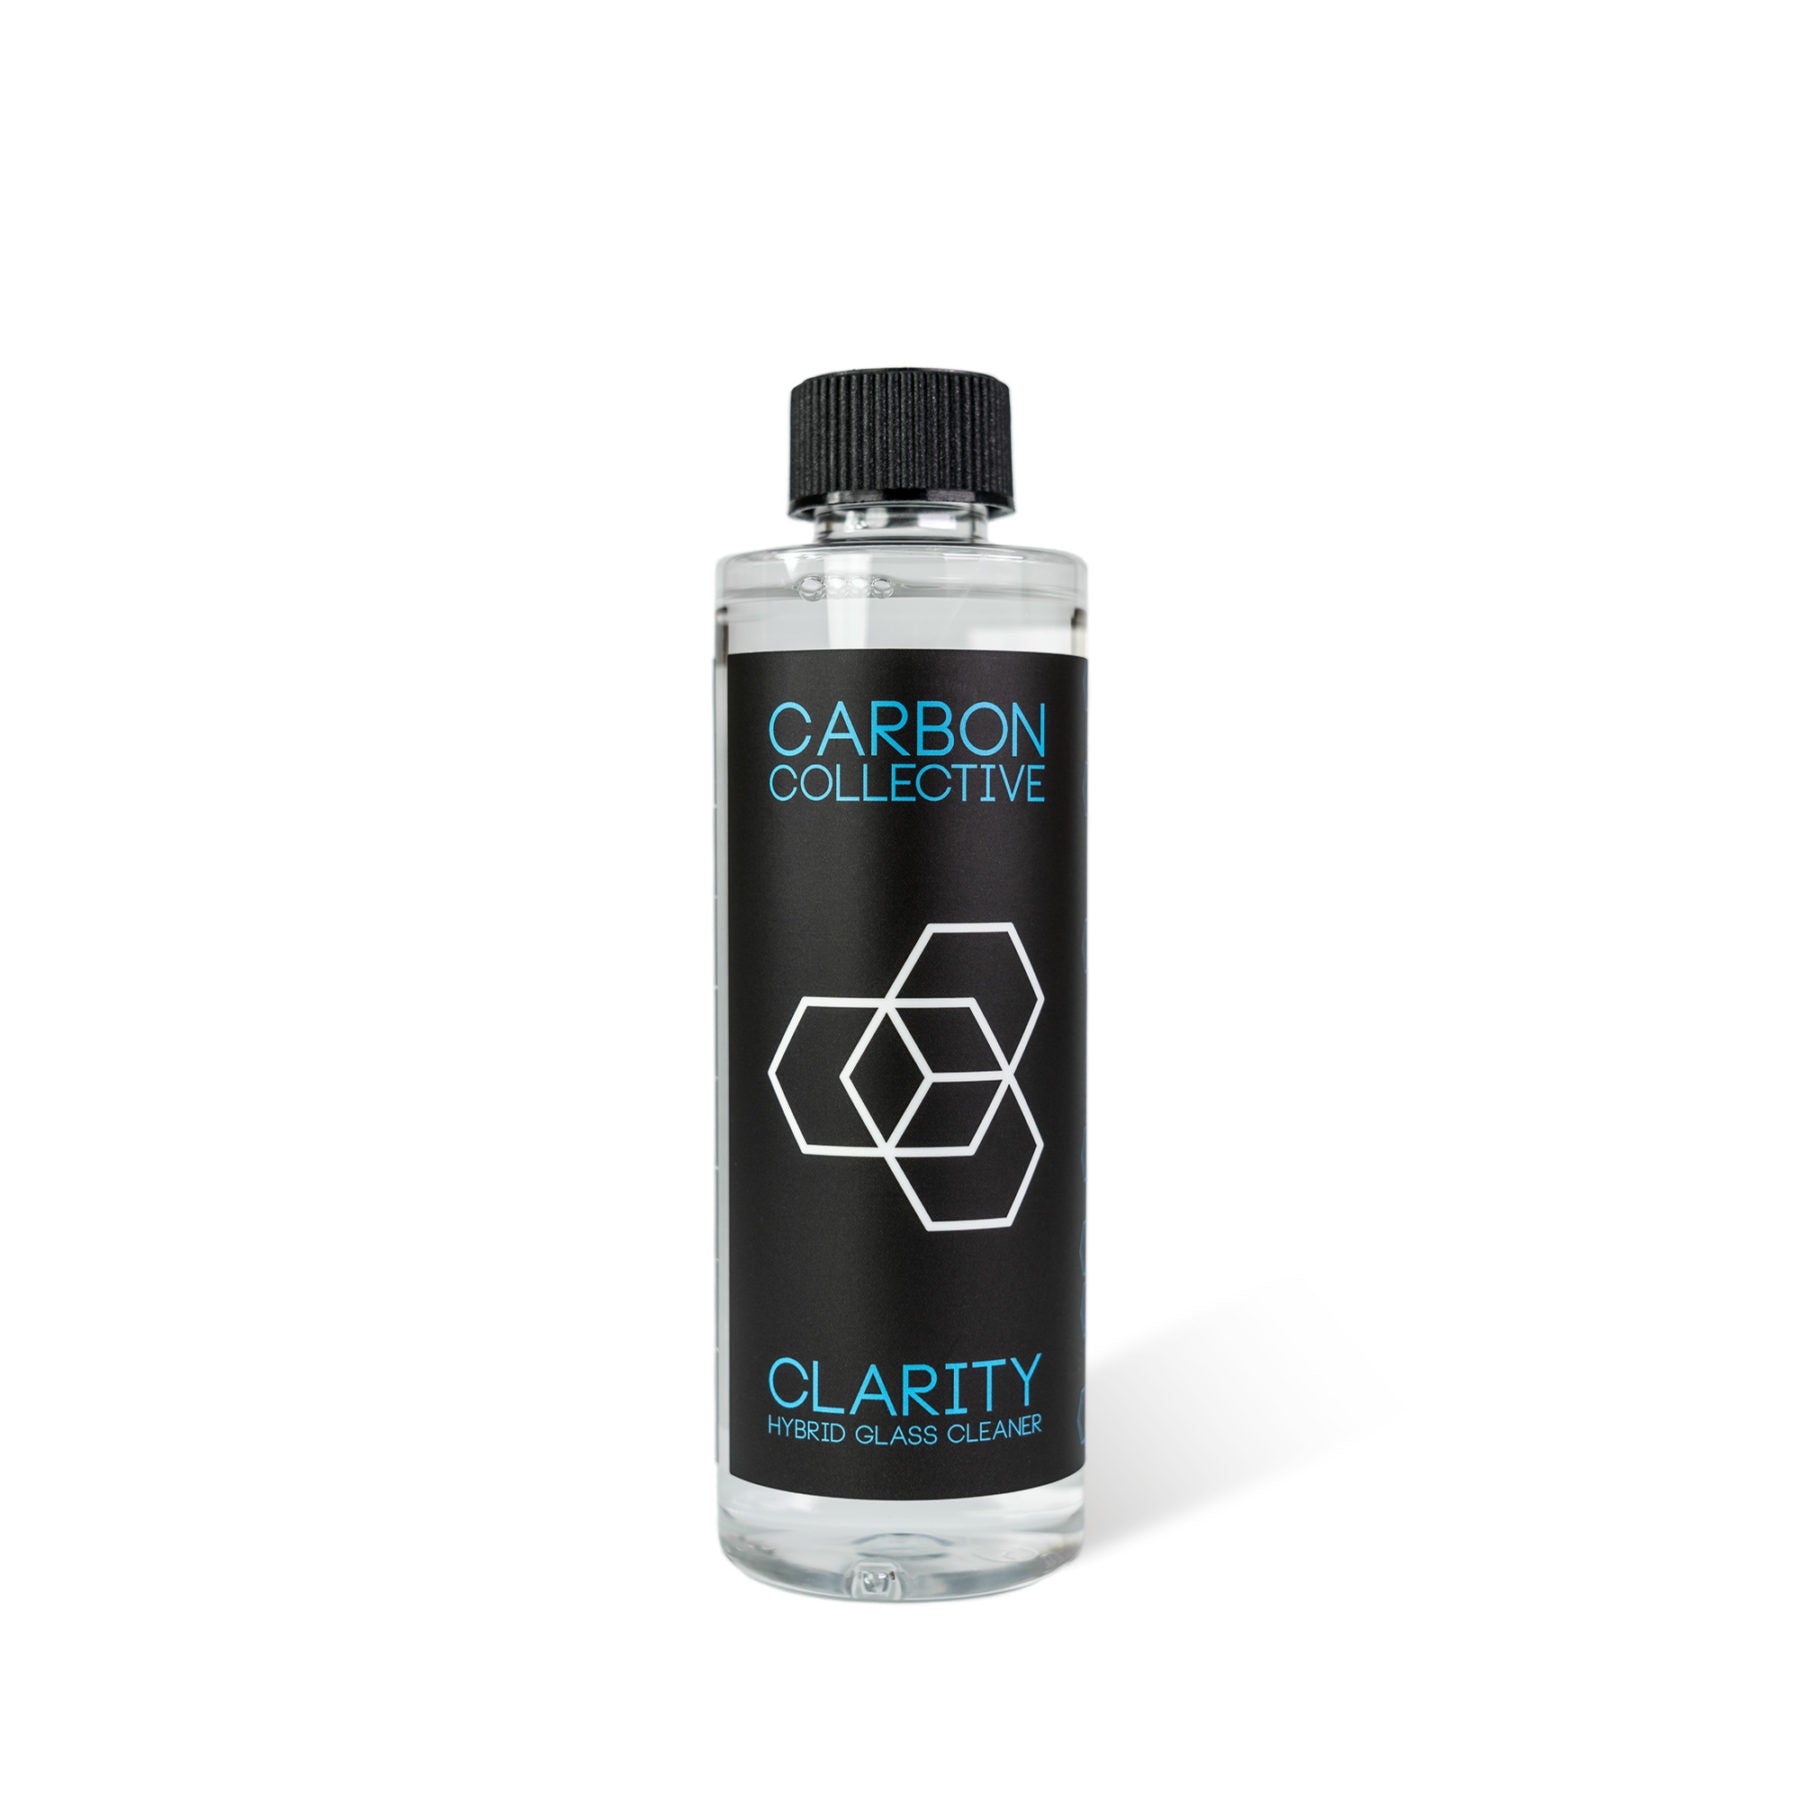 Carbon Collective Clarity Hybrid Glass Cleaner 500ml